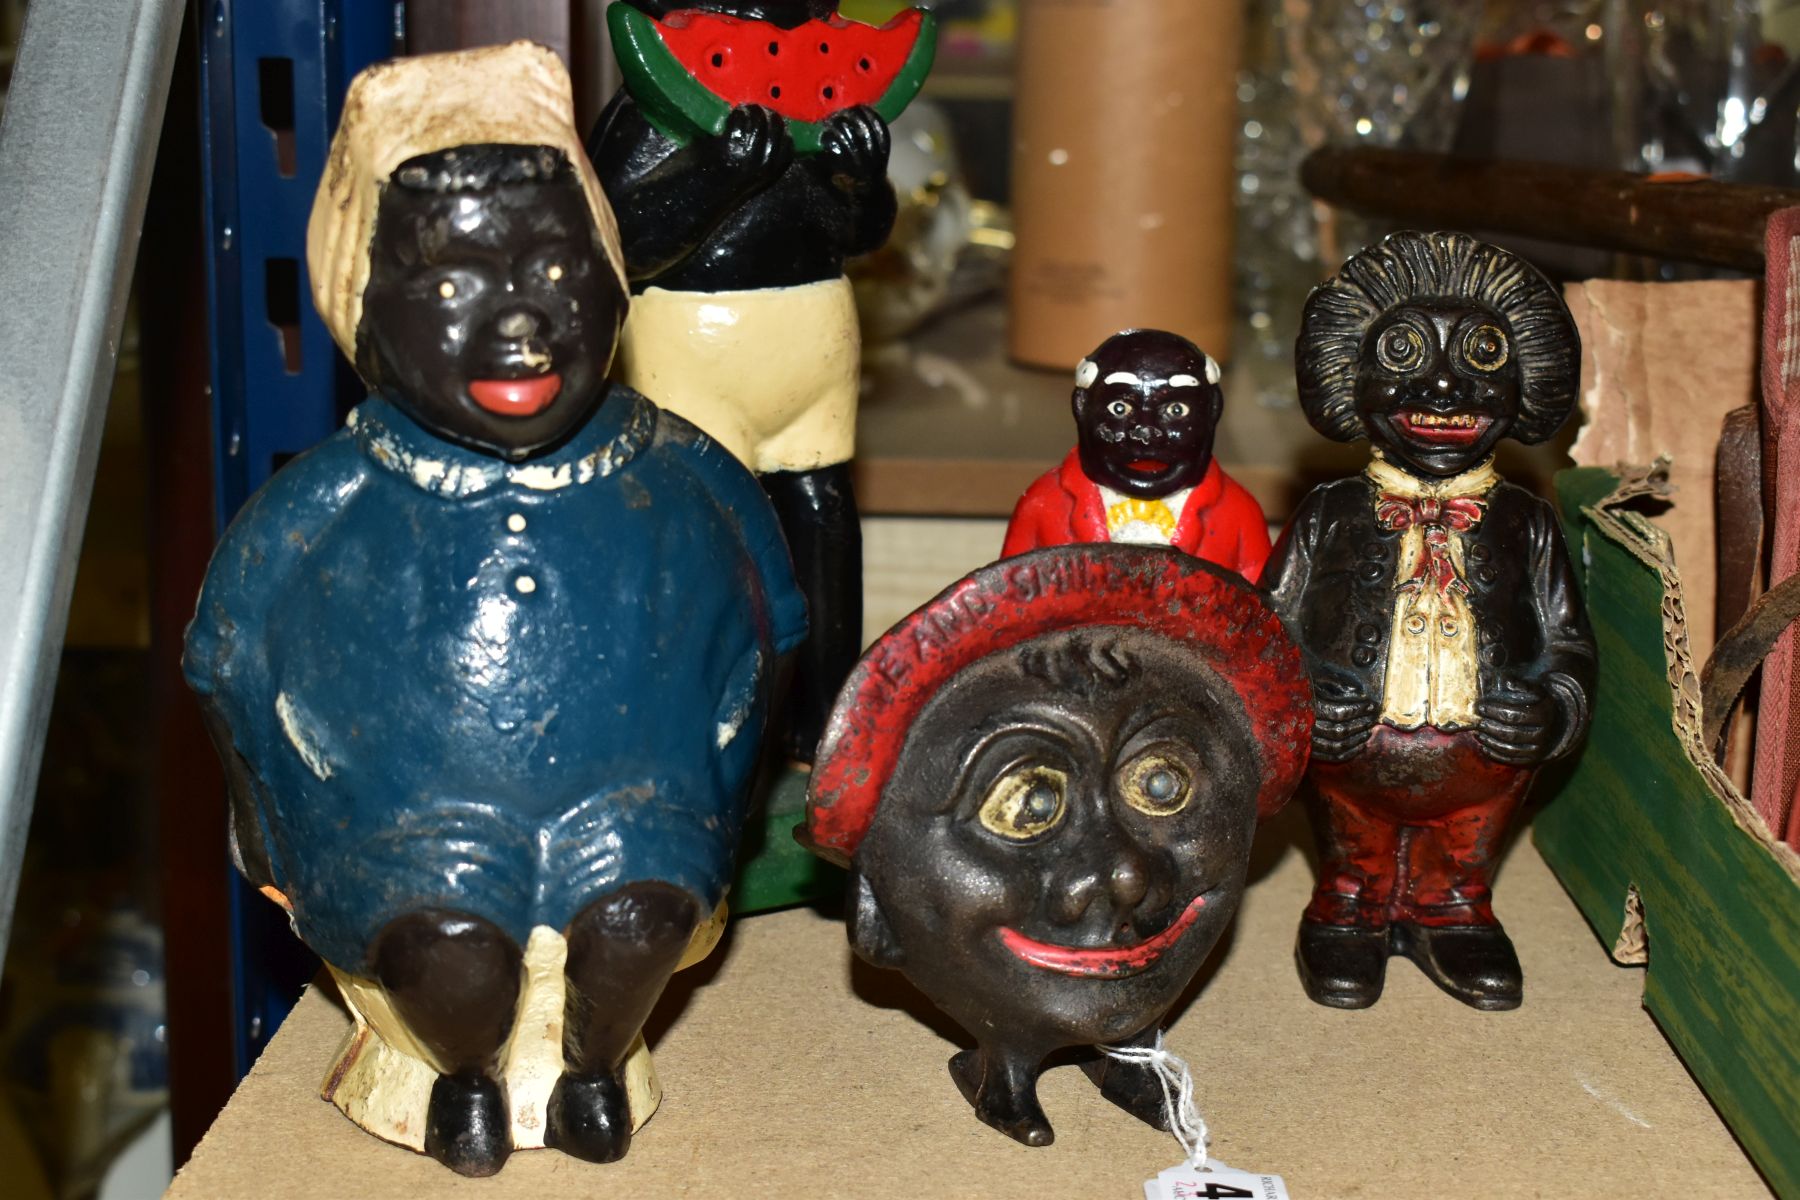 A QUANTITY OF CAST IRON MONEY BOXES/BANKS, assorted designs and colours to include 'Save & Smile - Image 2 of 5